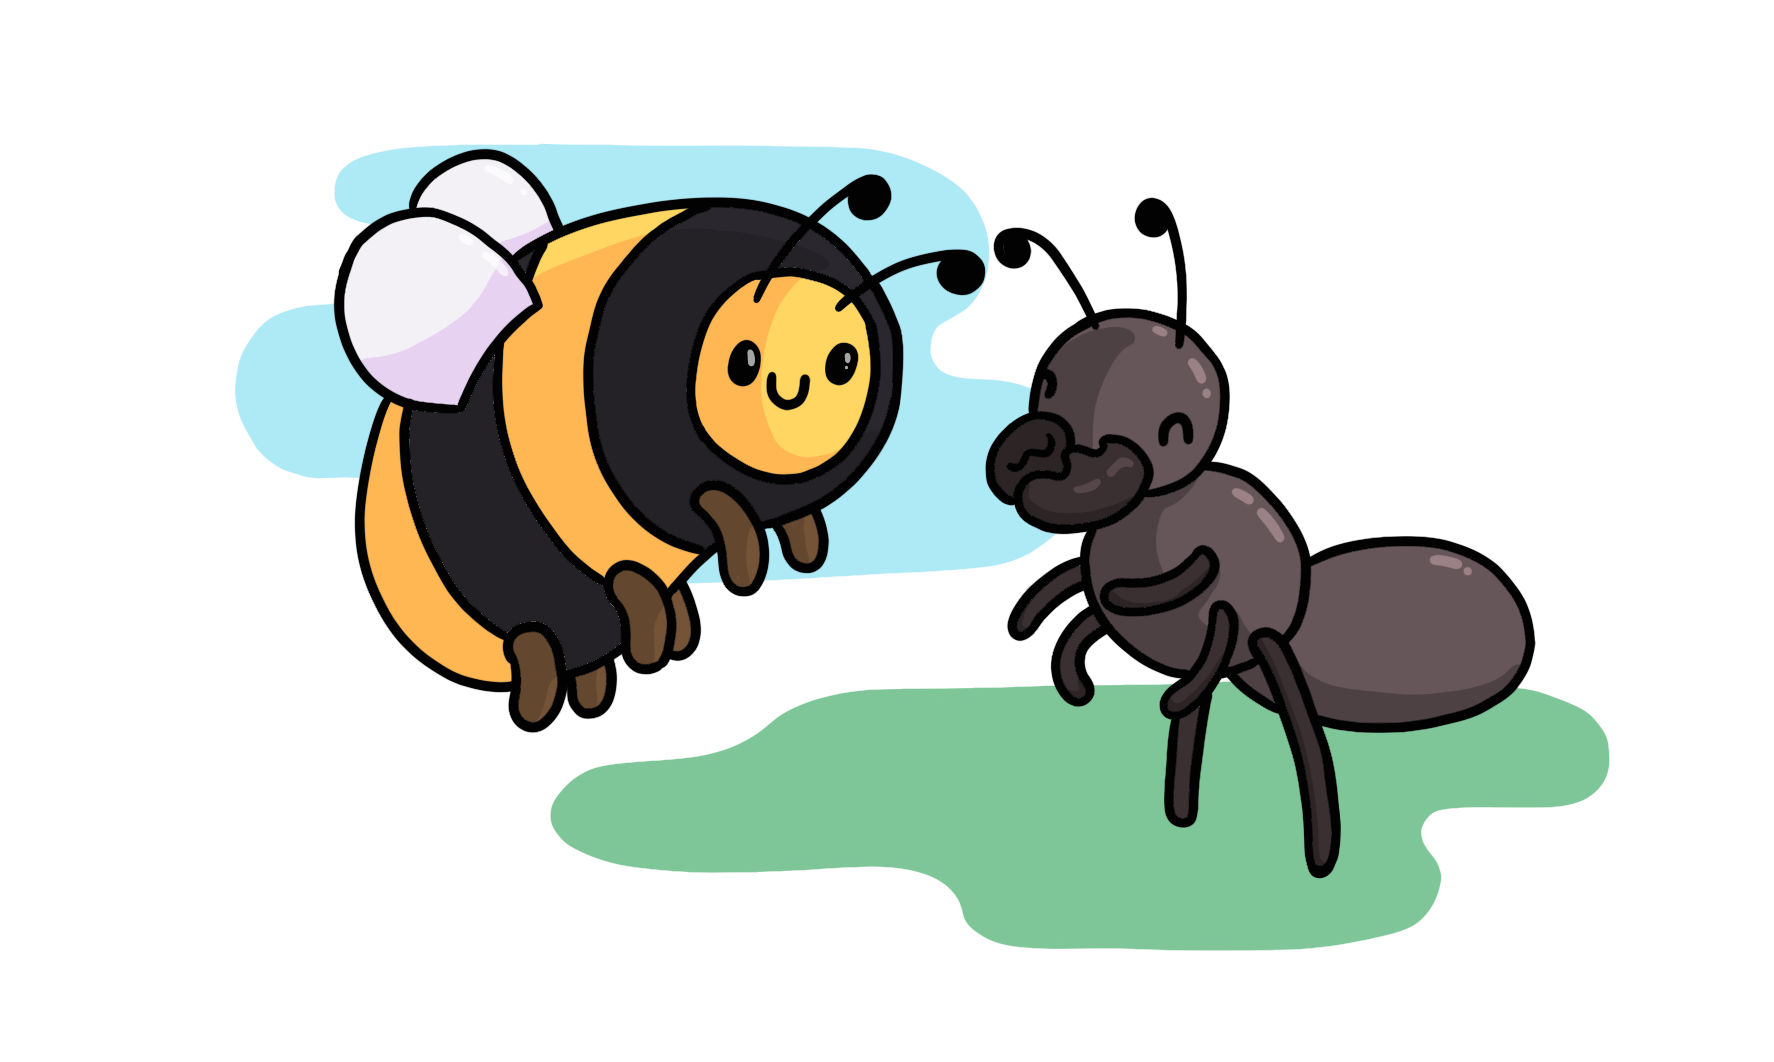 A happy bee on the left and a friendly ant on the right